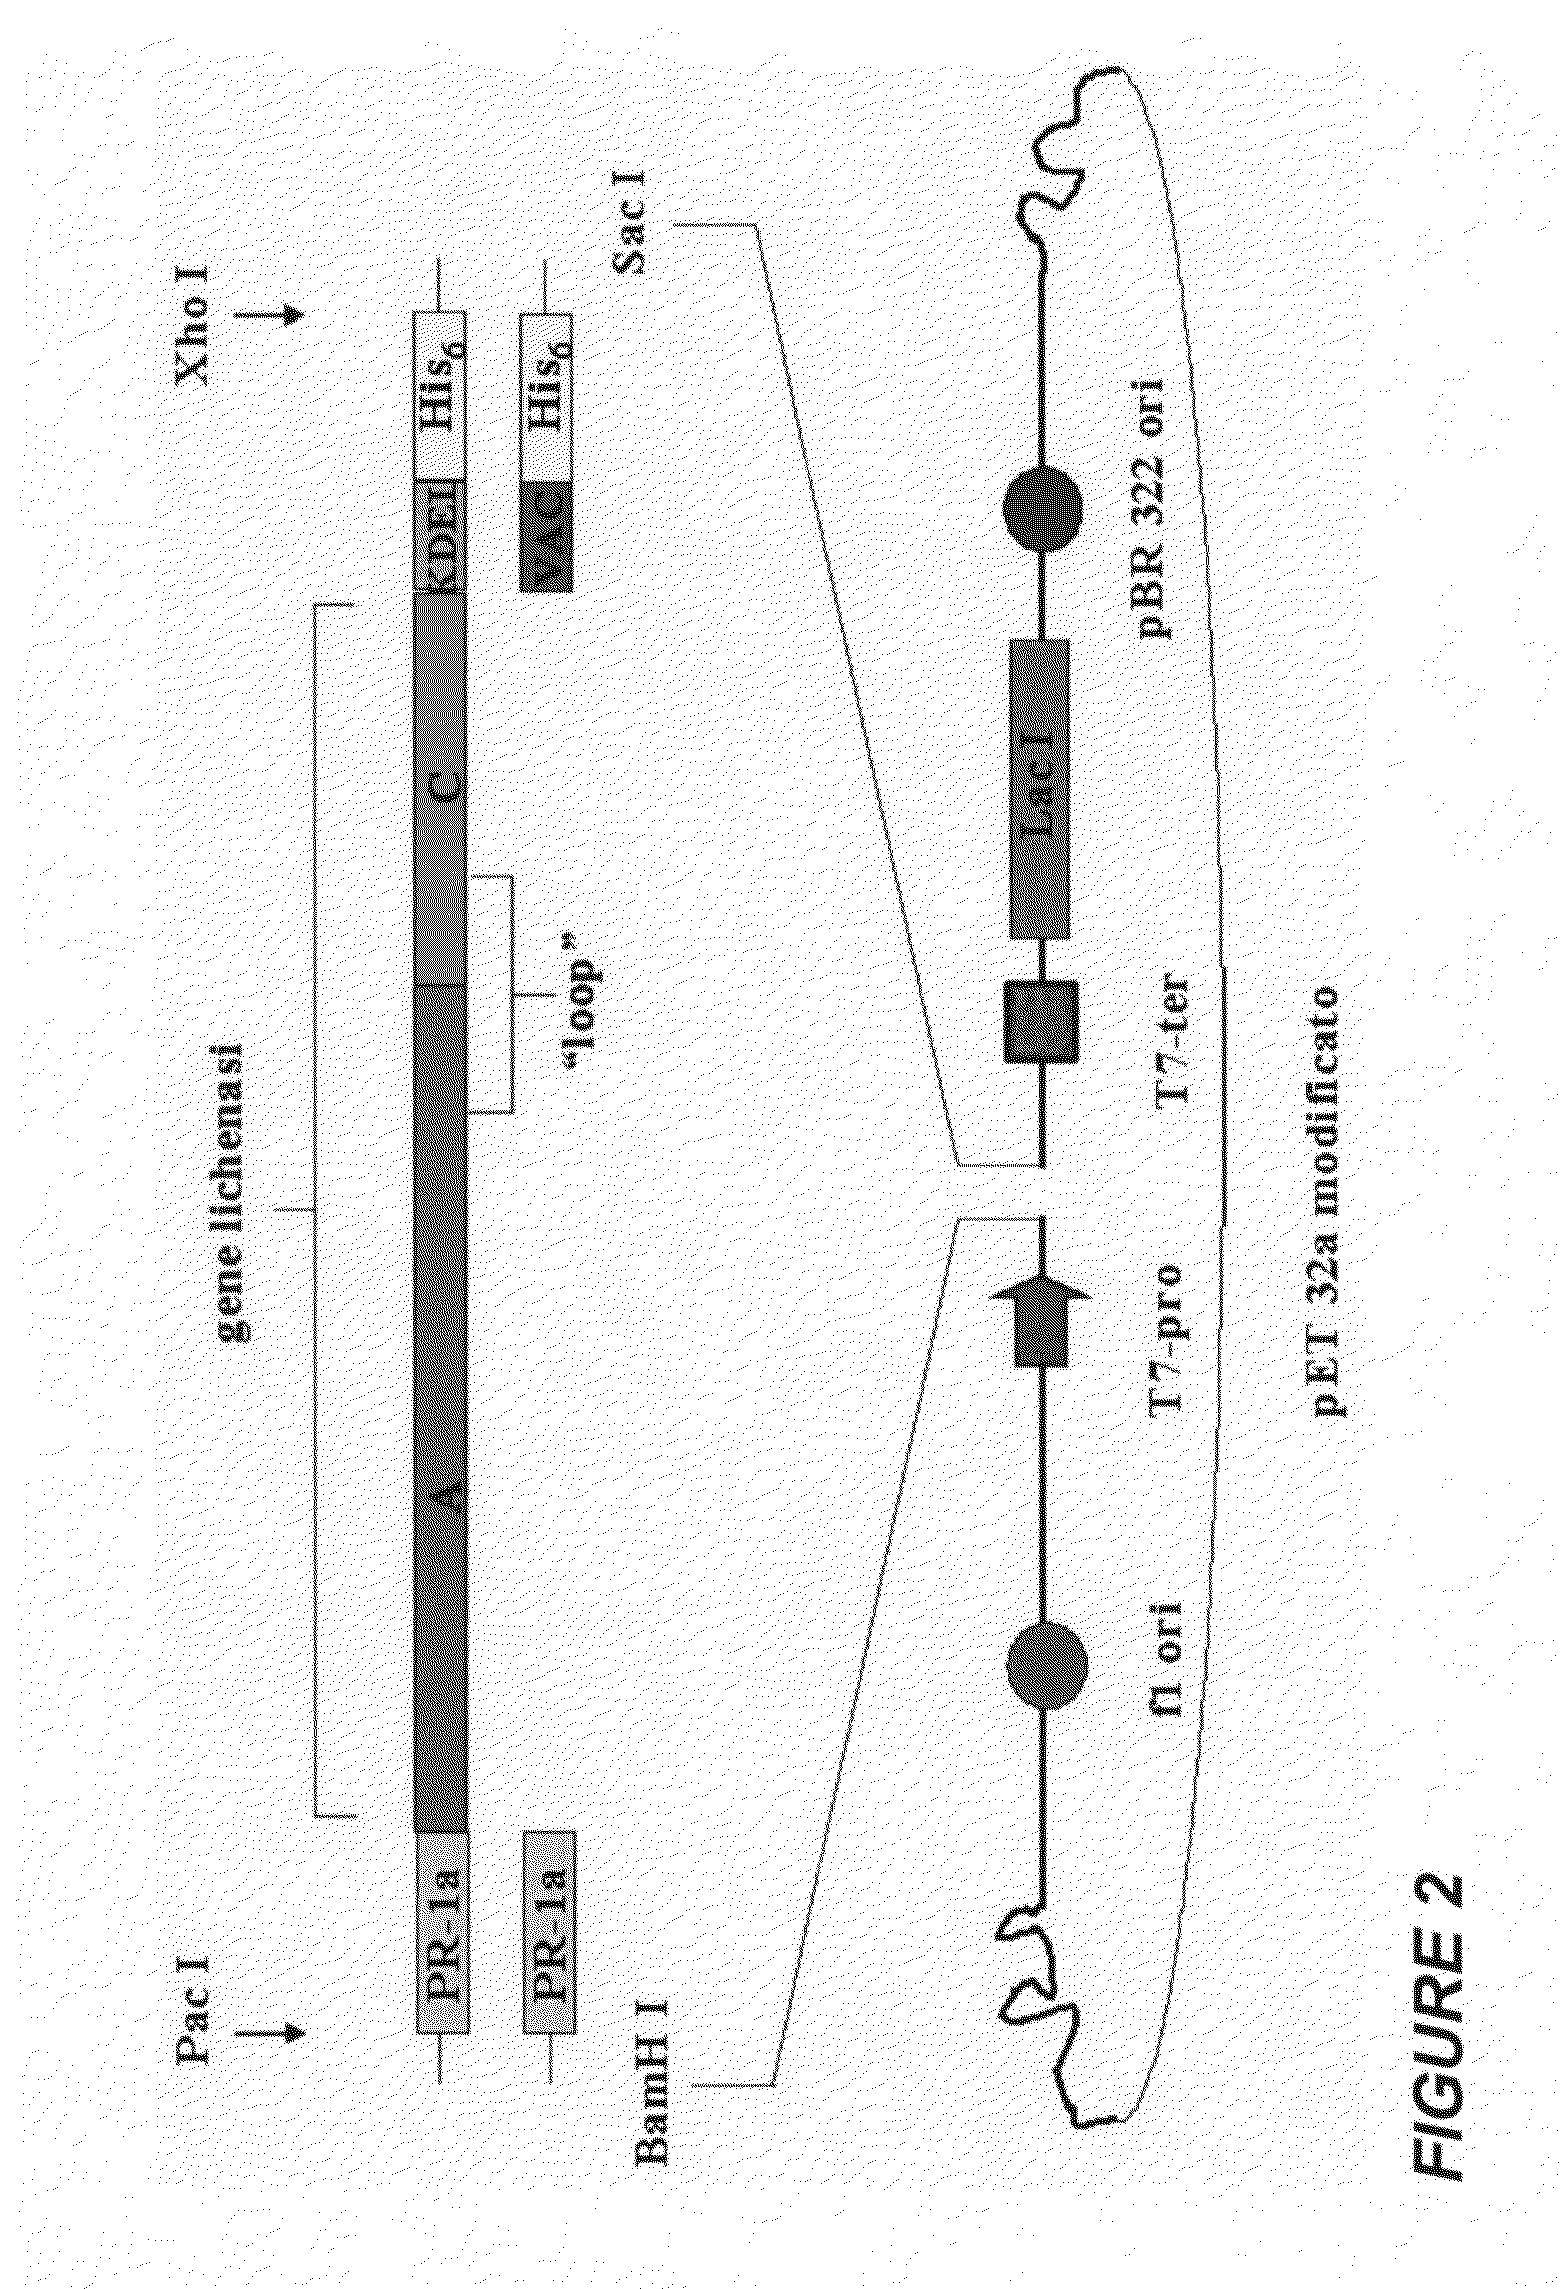 Influenza antibodies, compositions, and related methods